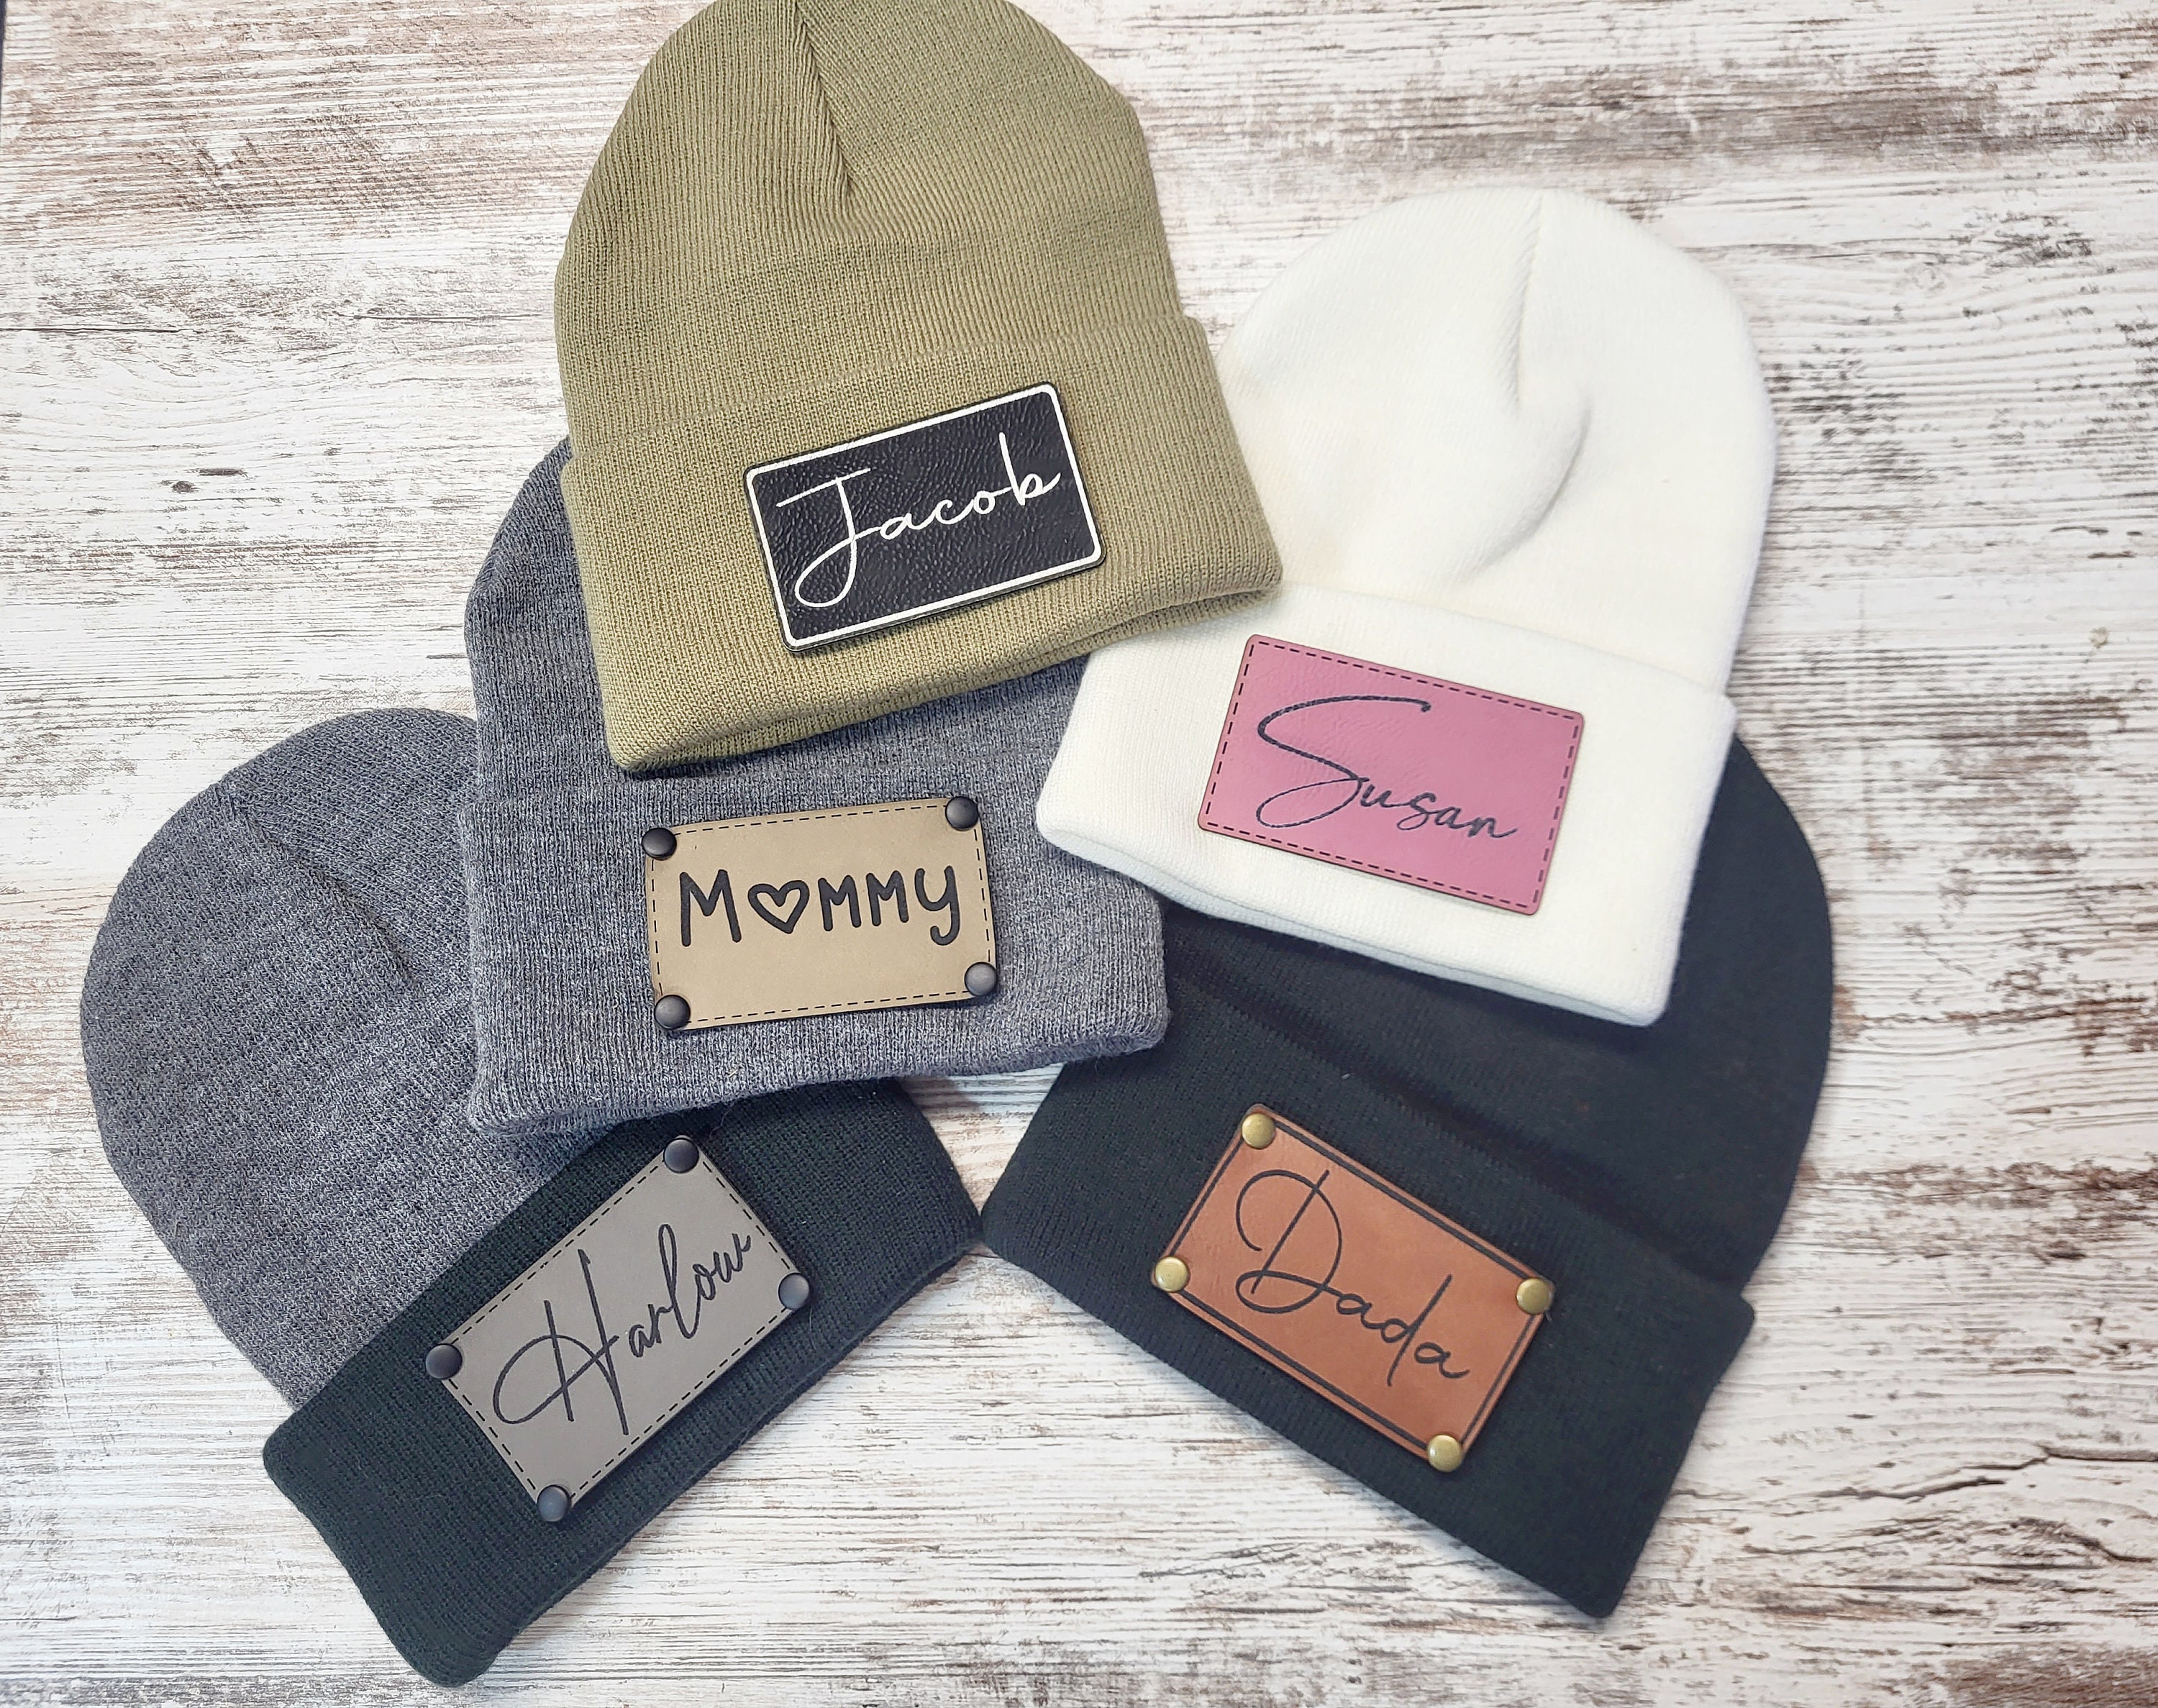 Personalized Pointed Monogram Beanie Cap, Unisex Hat, Wedding Party Gifts, Vacation Hats, Skull Caps, Personalized, Custom